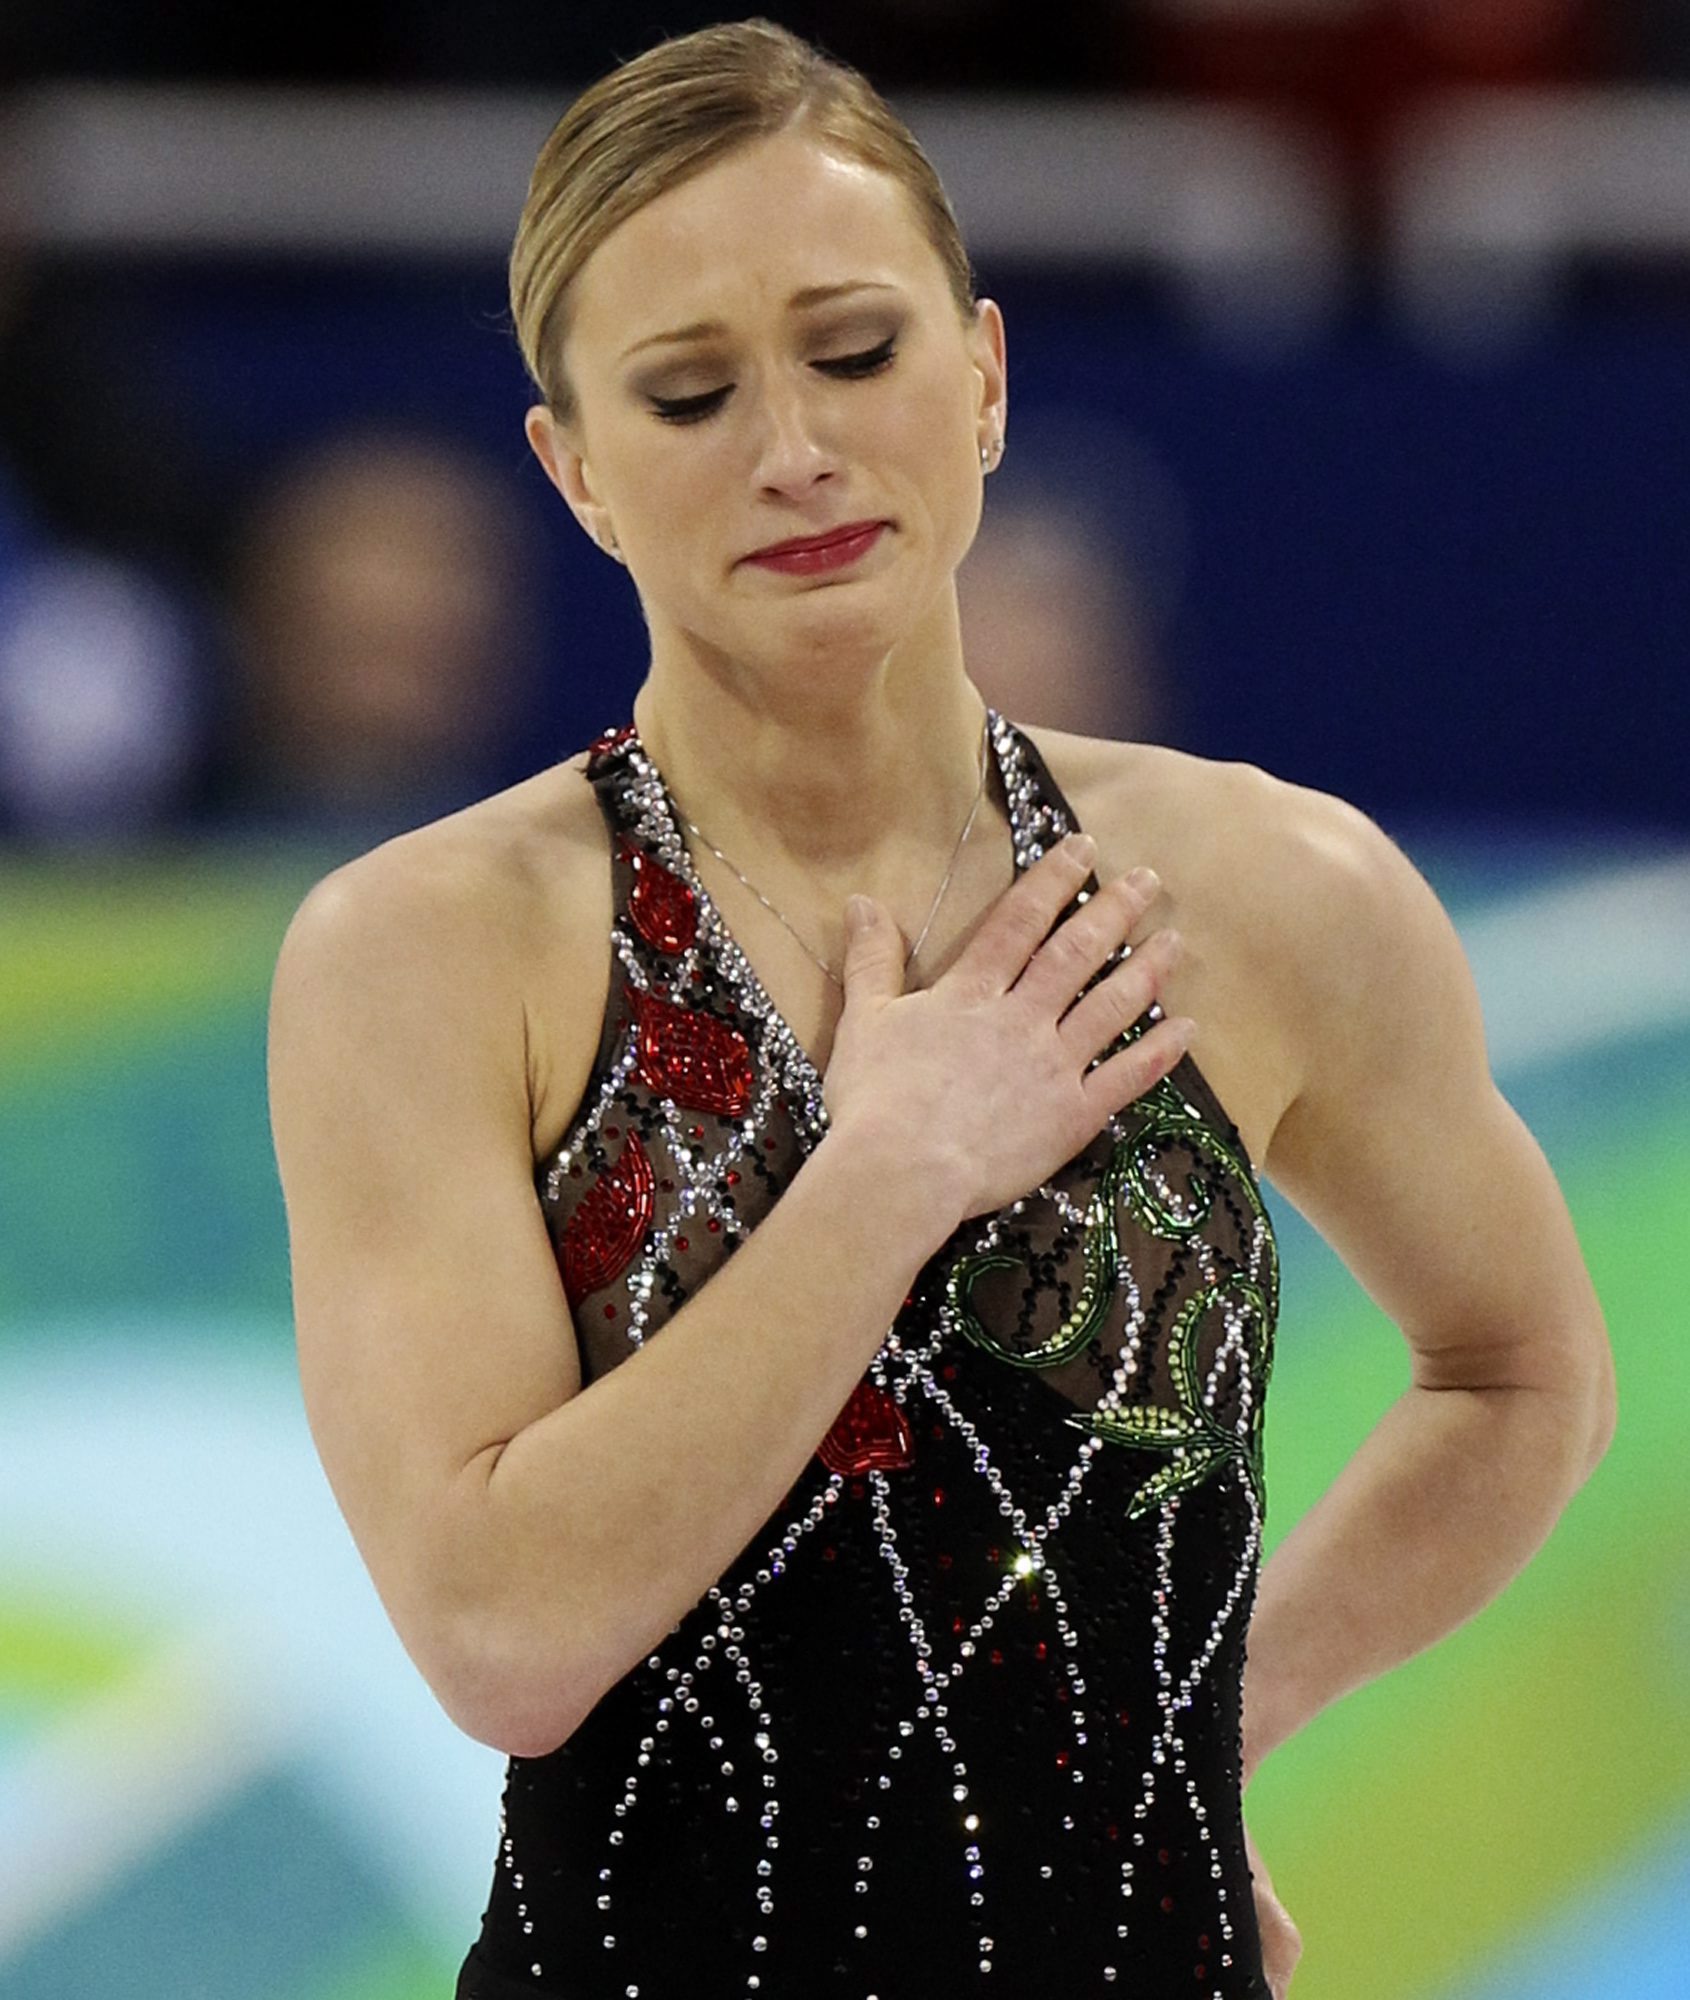 Joannie Rochette reacts with tears and a hand over her heart following her short program in Vancouver 2010